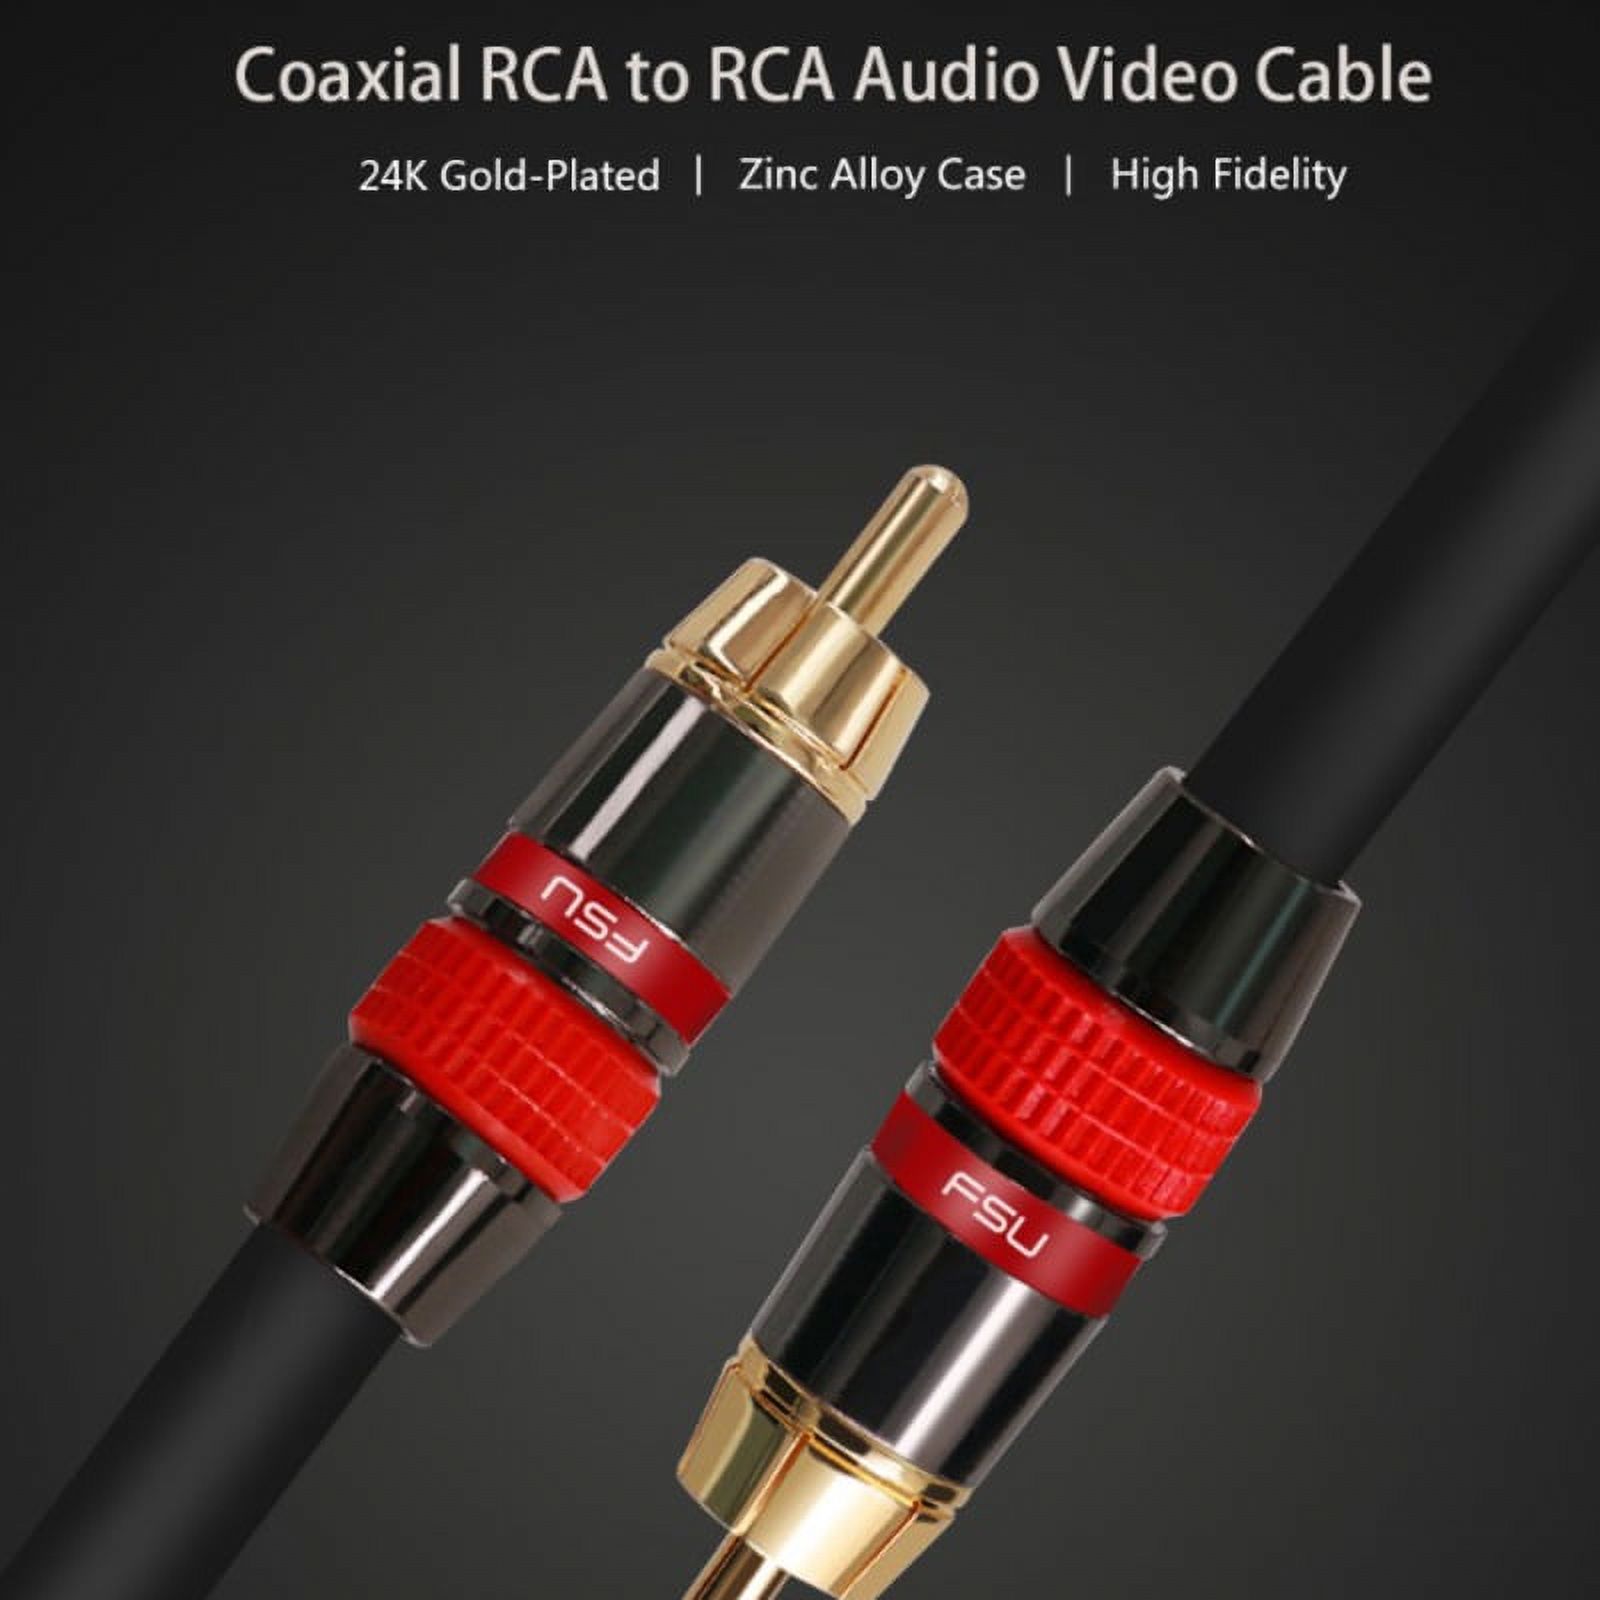 Digital Audio RCA Cable Premium Stereo RCA to RCA Coaxial SPDIF Cable Male Speaker Hifi Subwoofer Cable AV 2M - image 2 of 8